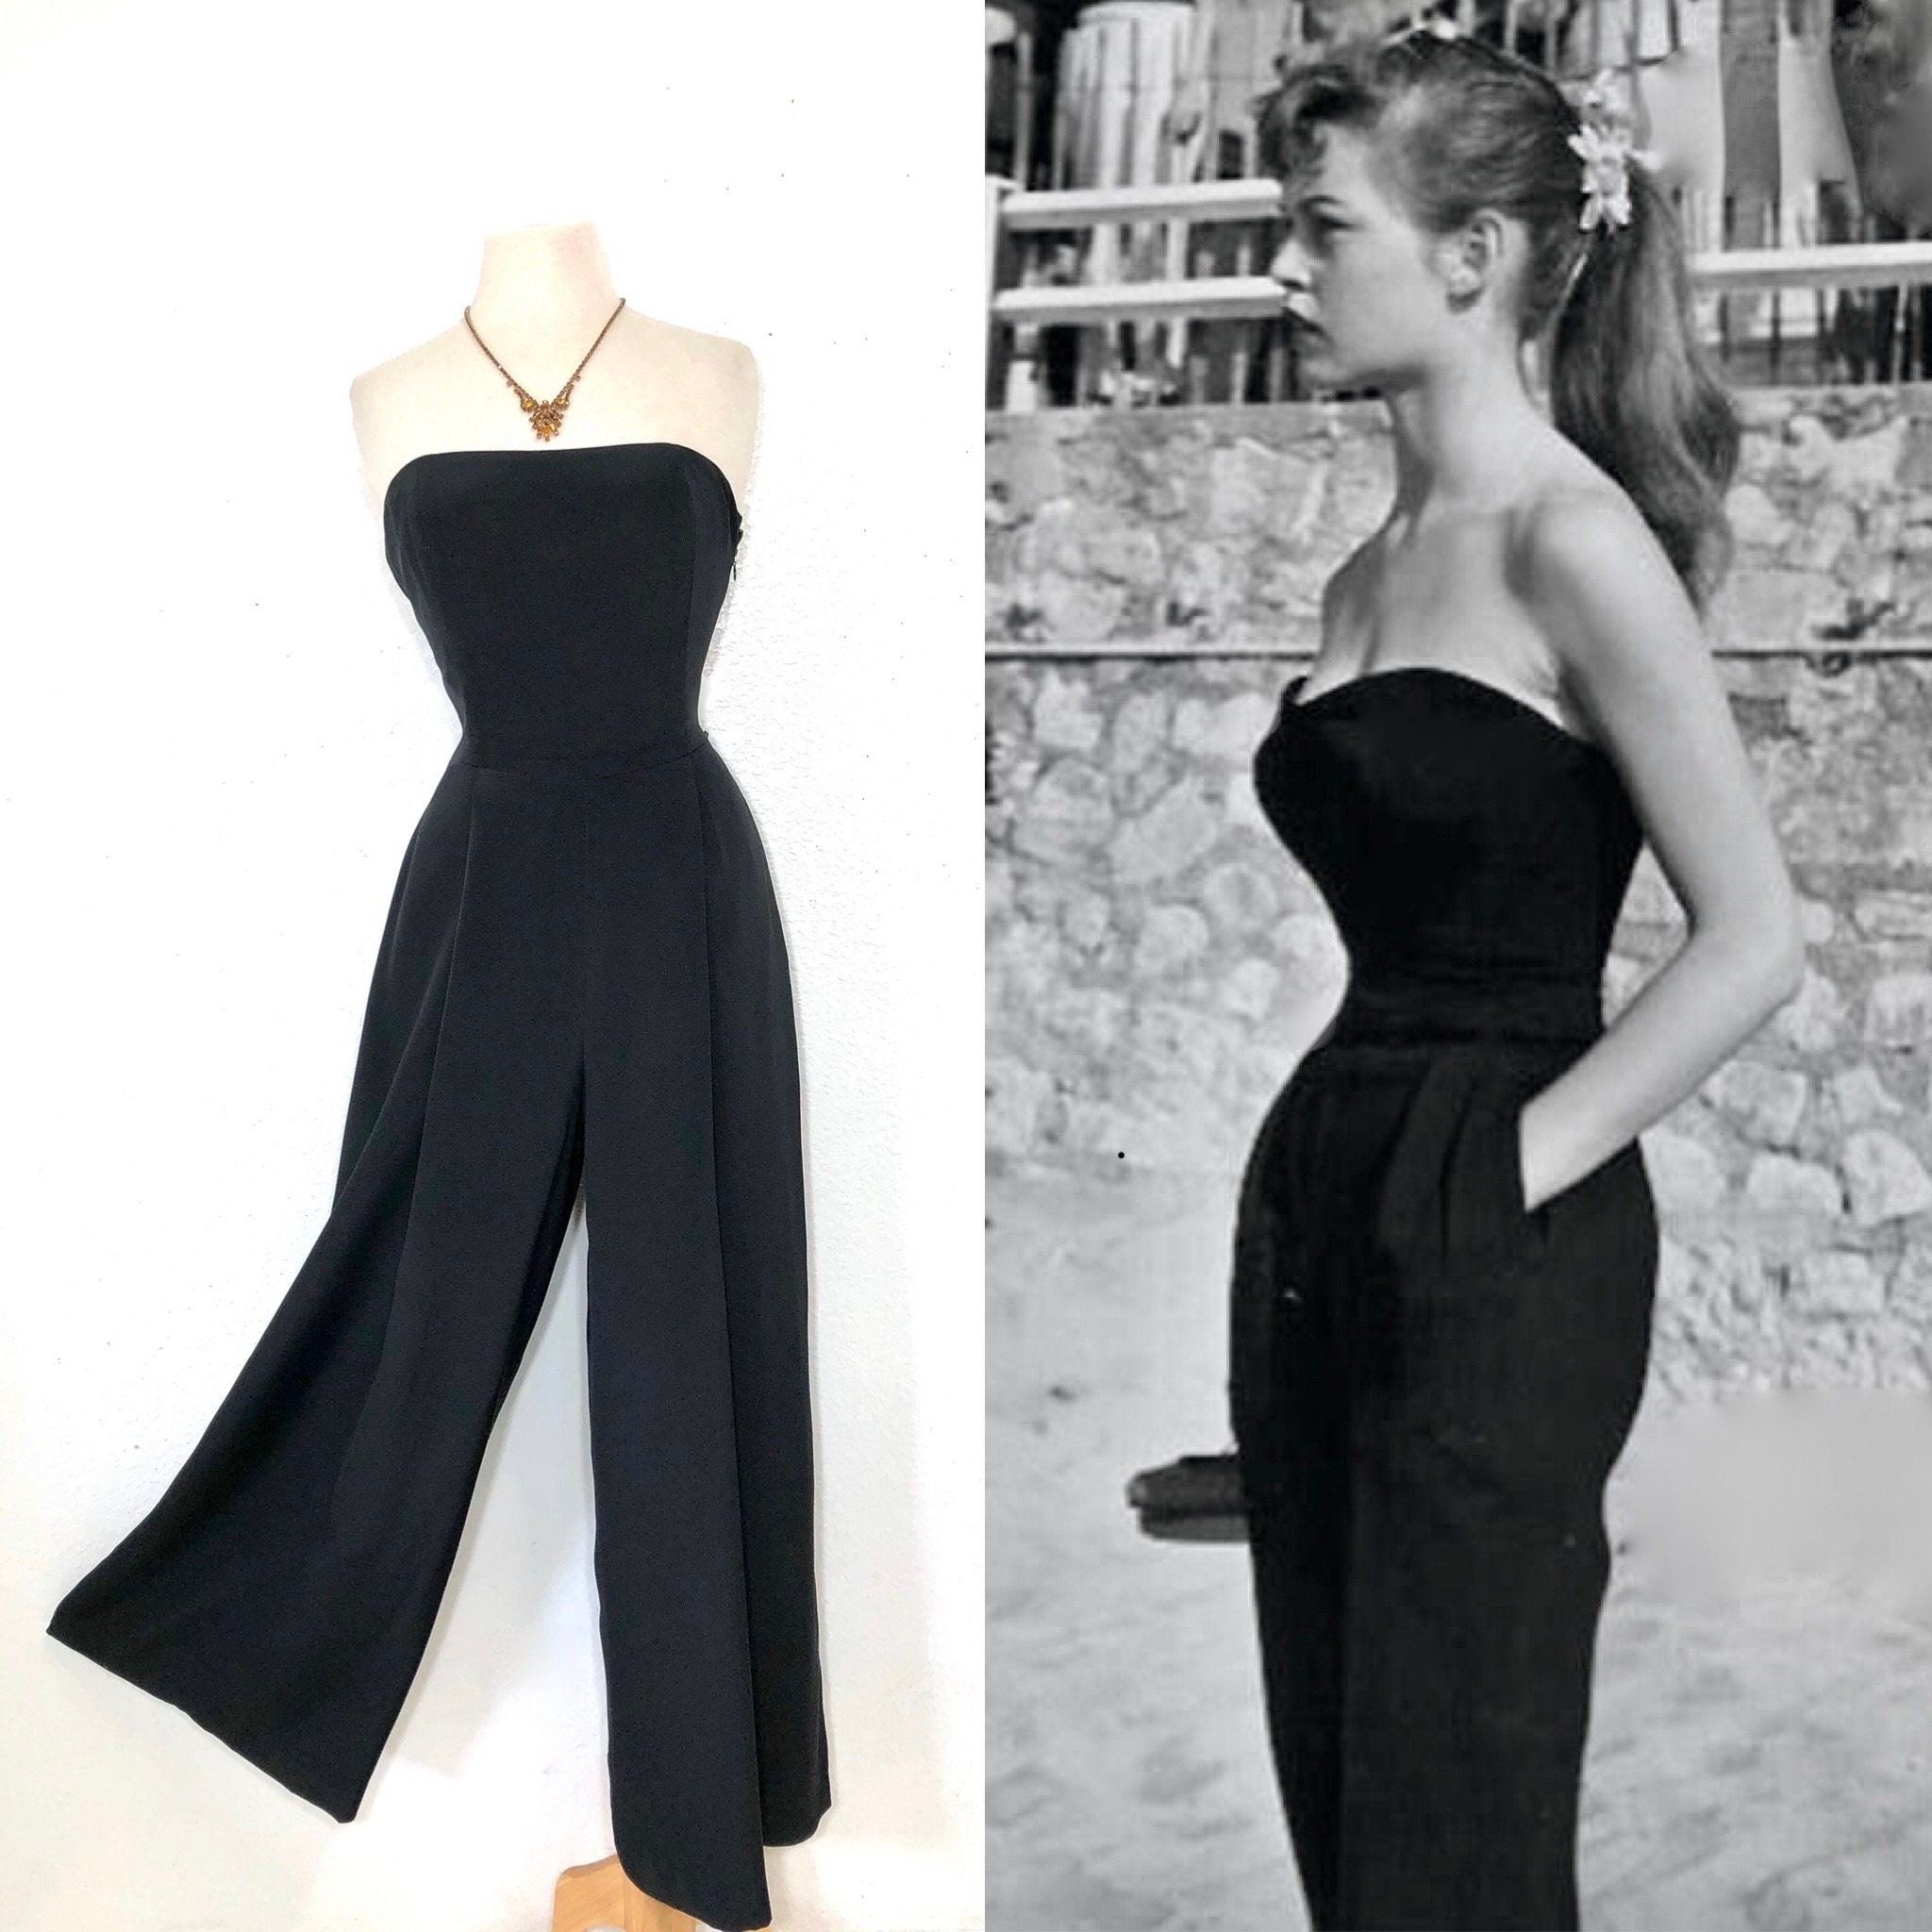 Black Formal Jumpsuit Womens, Wedding Guest Outfit, Women Jumpsuit for  Wedding Reception, Birthday Outfit, Sleeveless Jumpsuit With Corset 